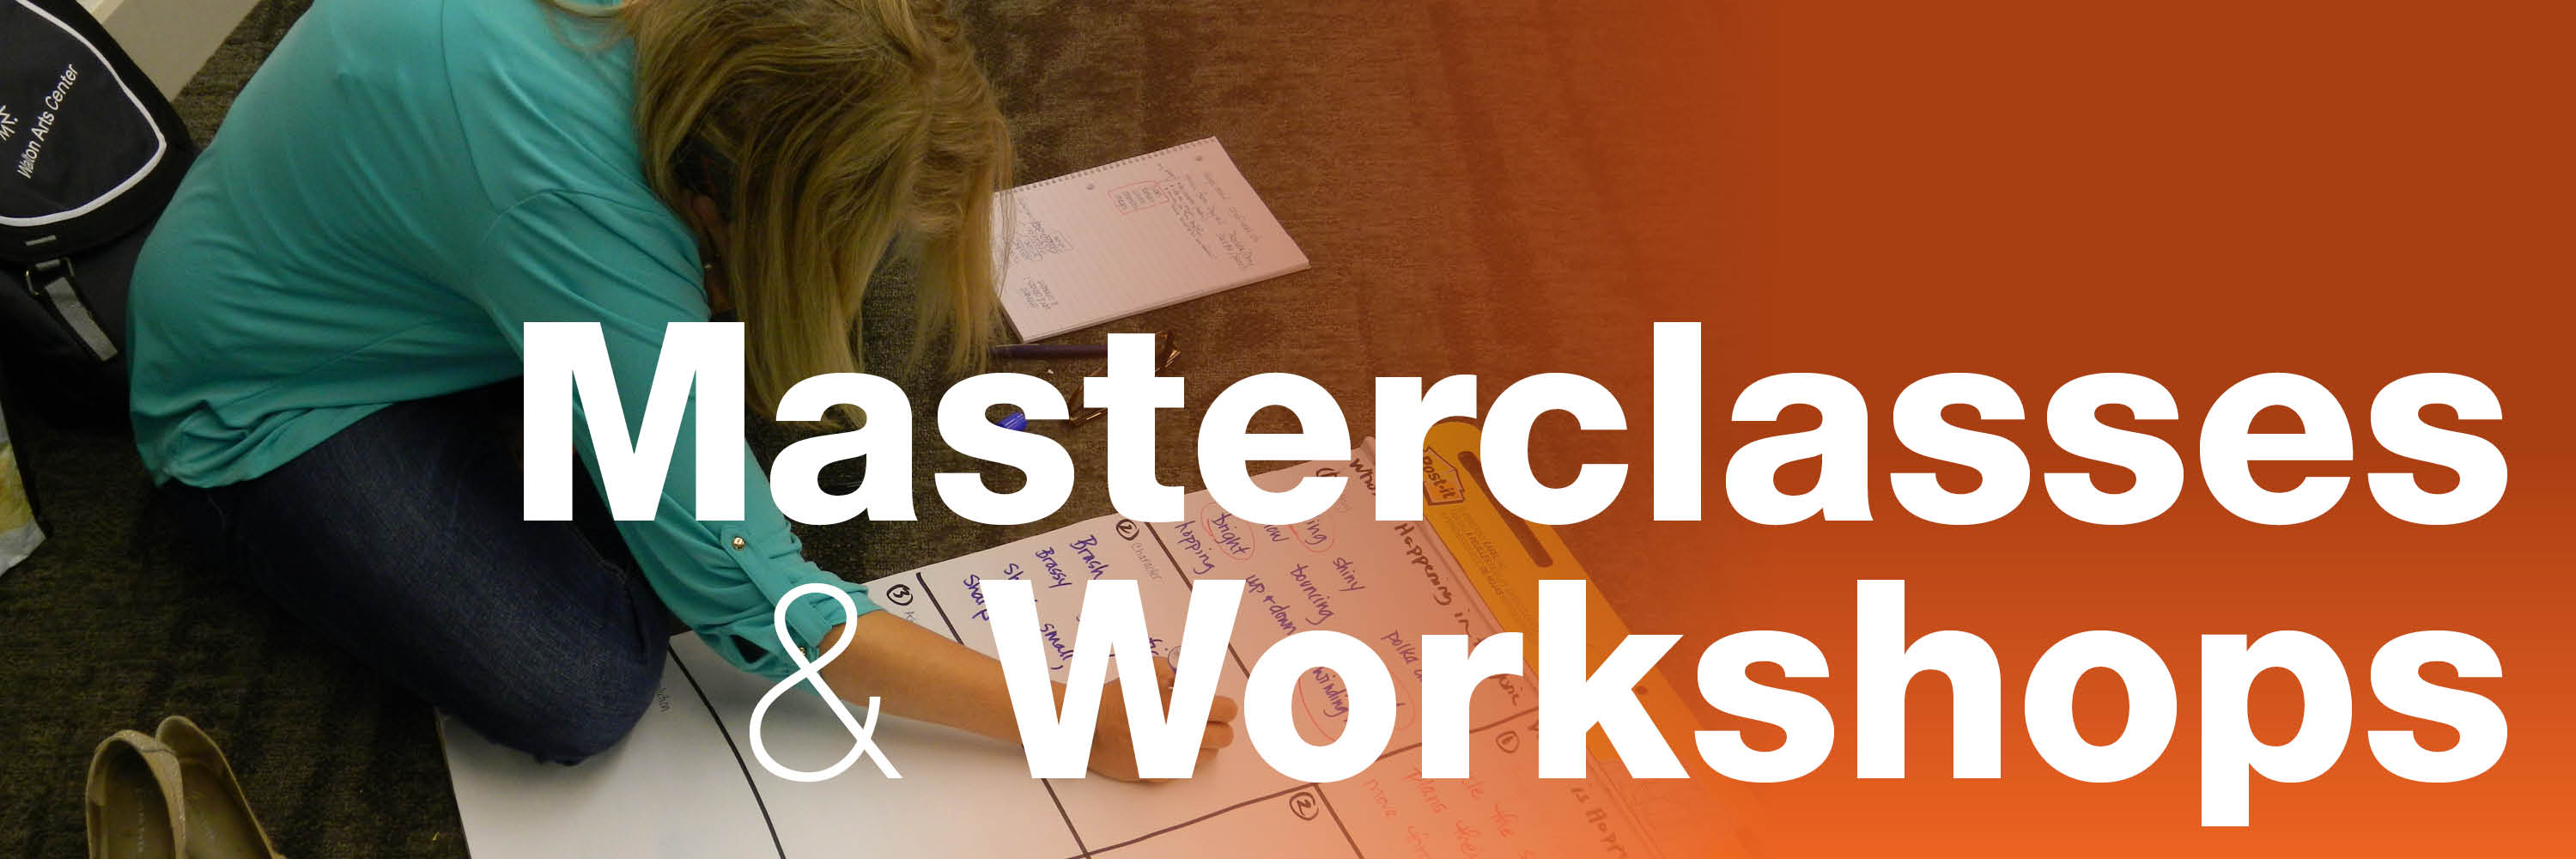 Masterclasses and Workshops